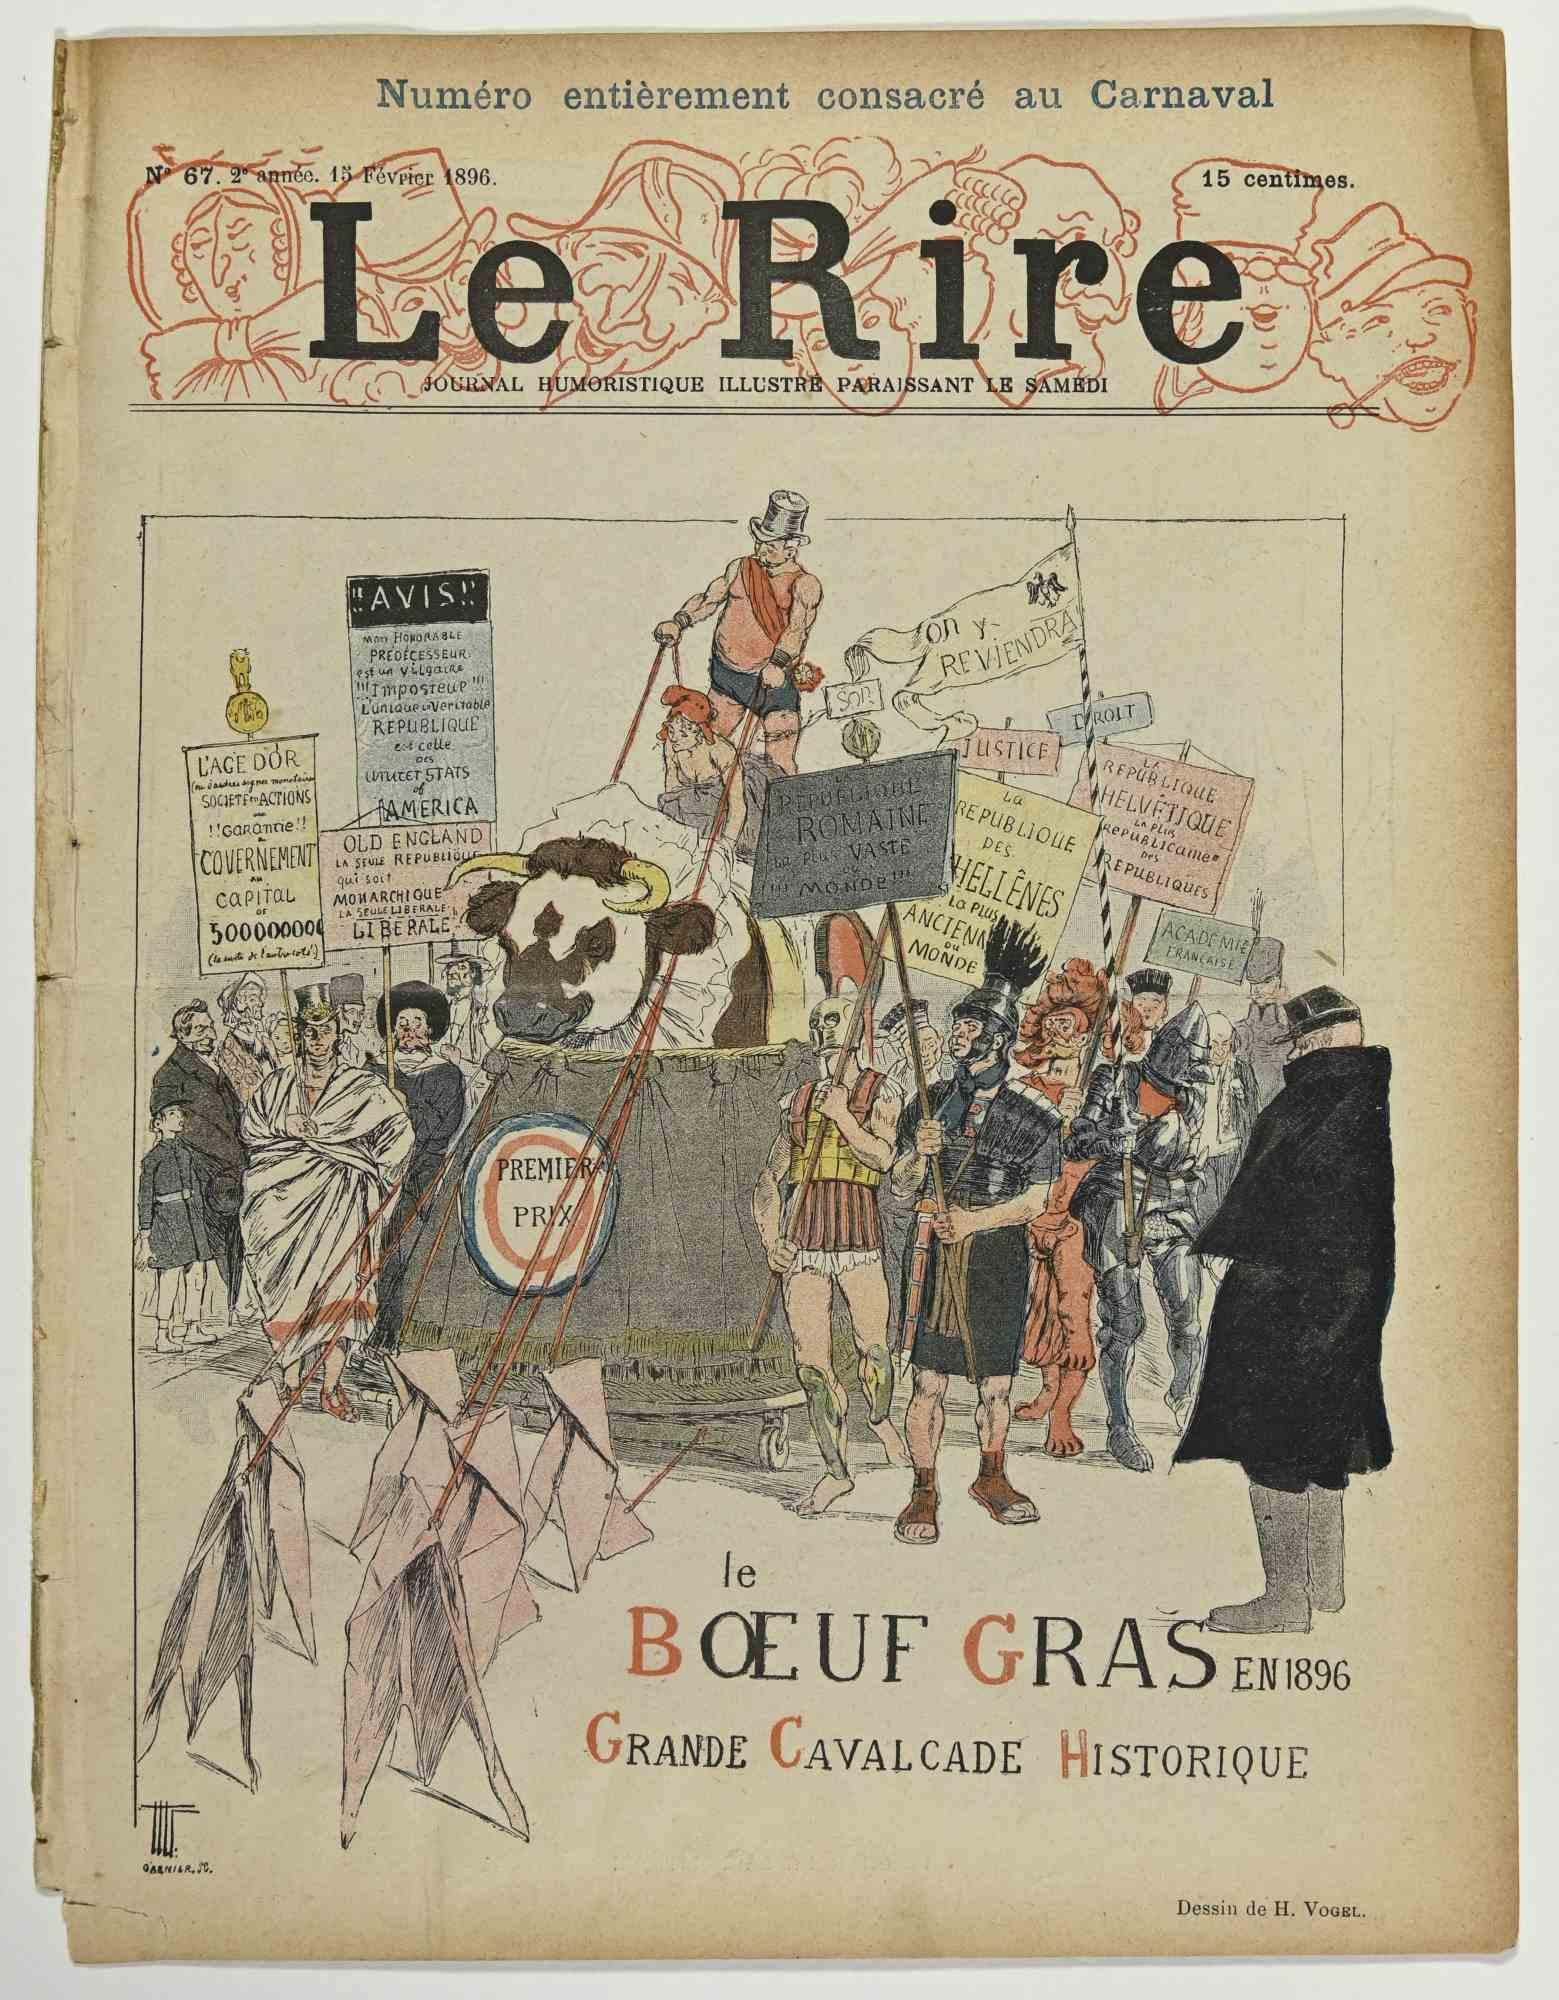 Le Rire is a Comic Magazine published in 1896, reproducing  in lithographs the drawings by Hermann Vogel (1856–1918).

